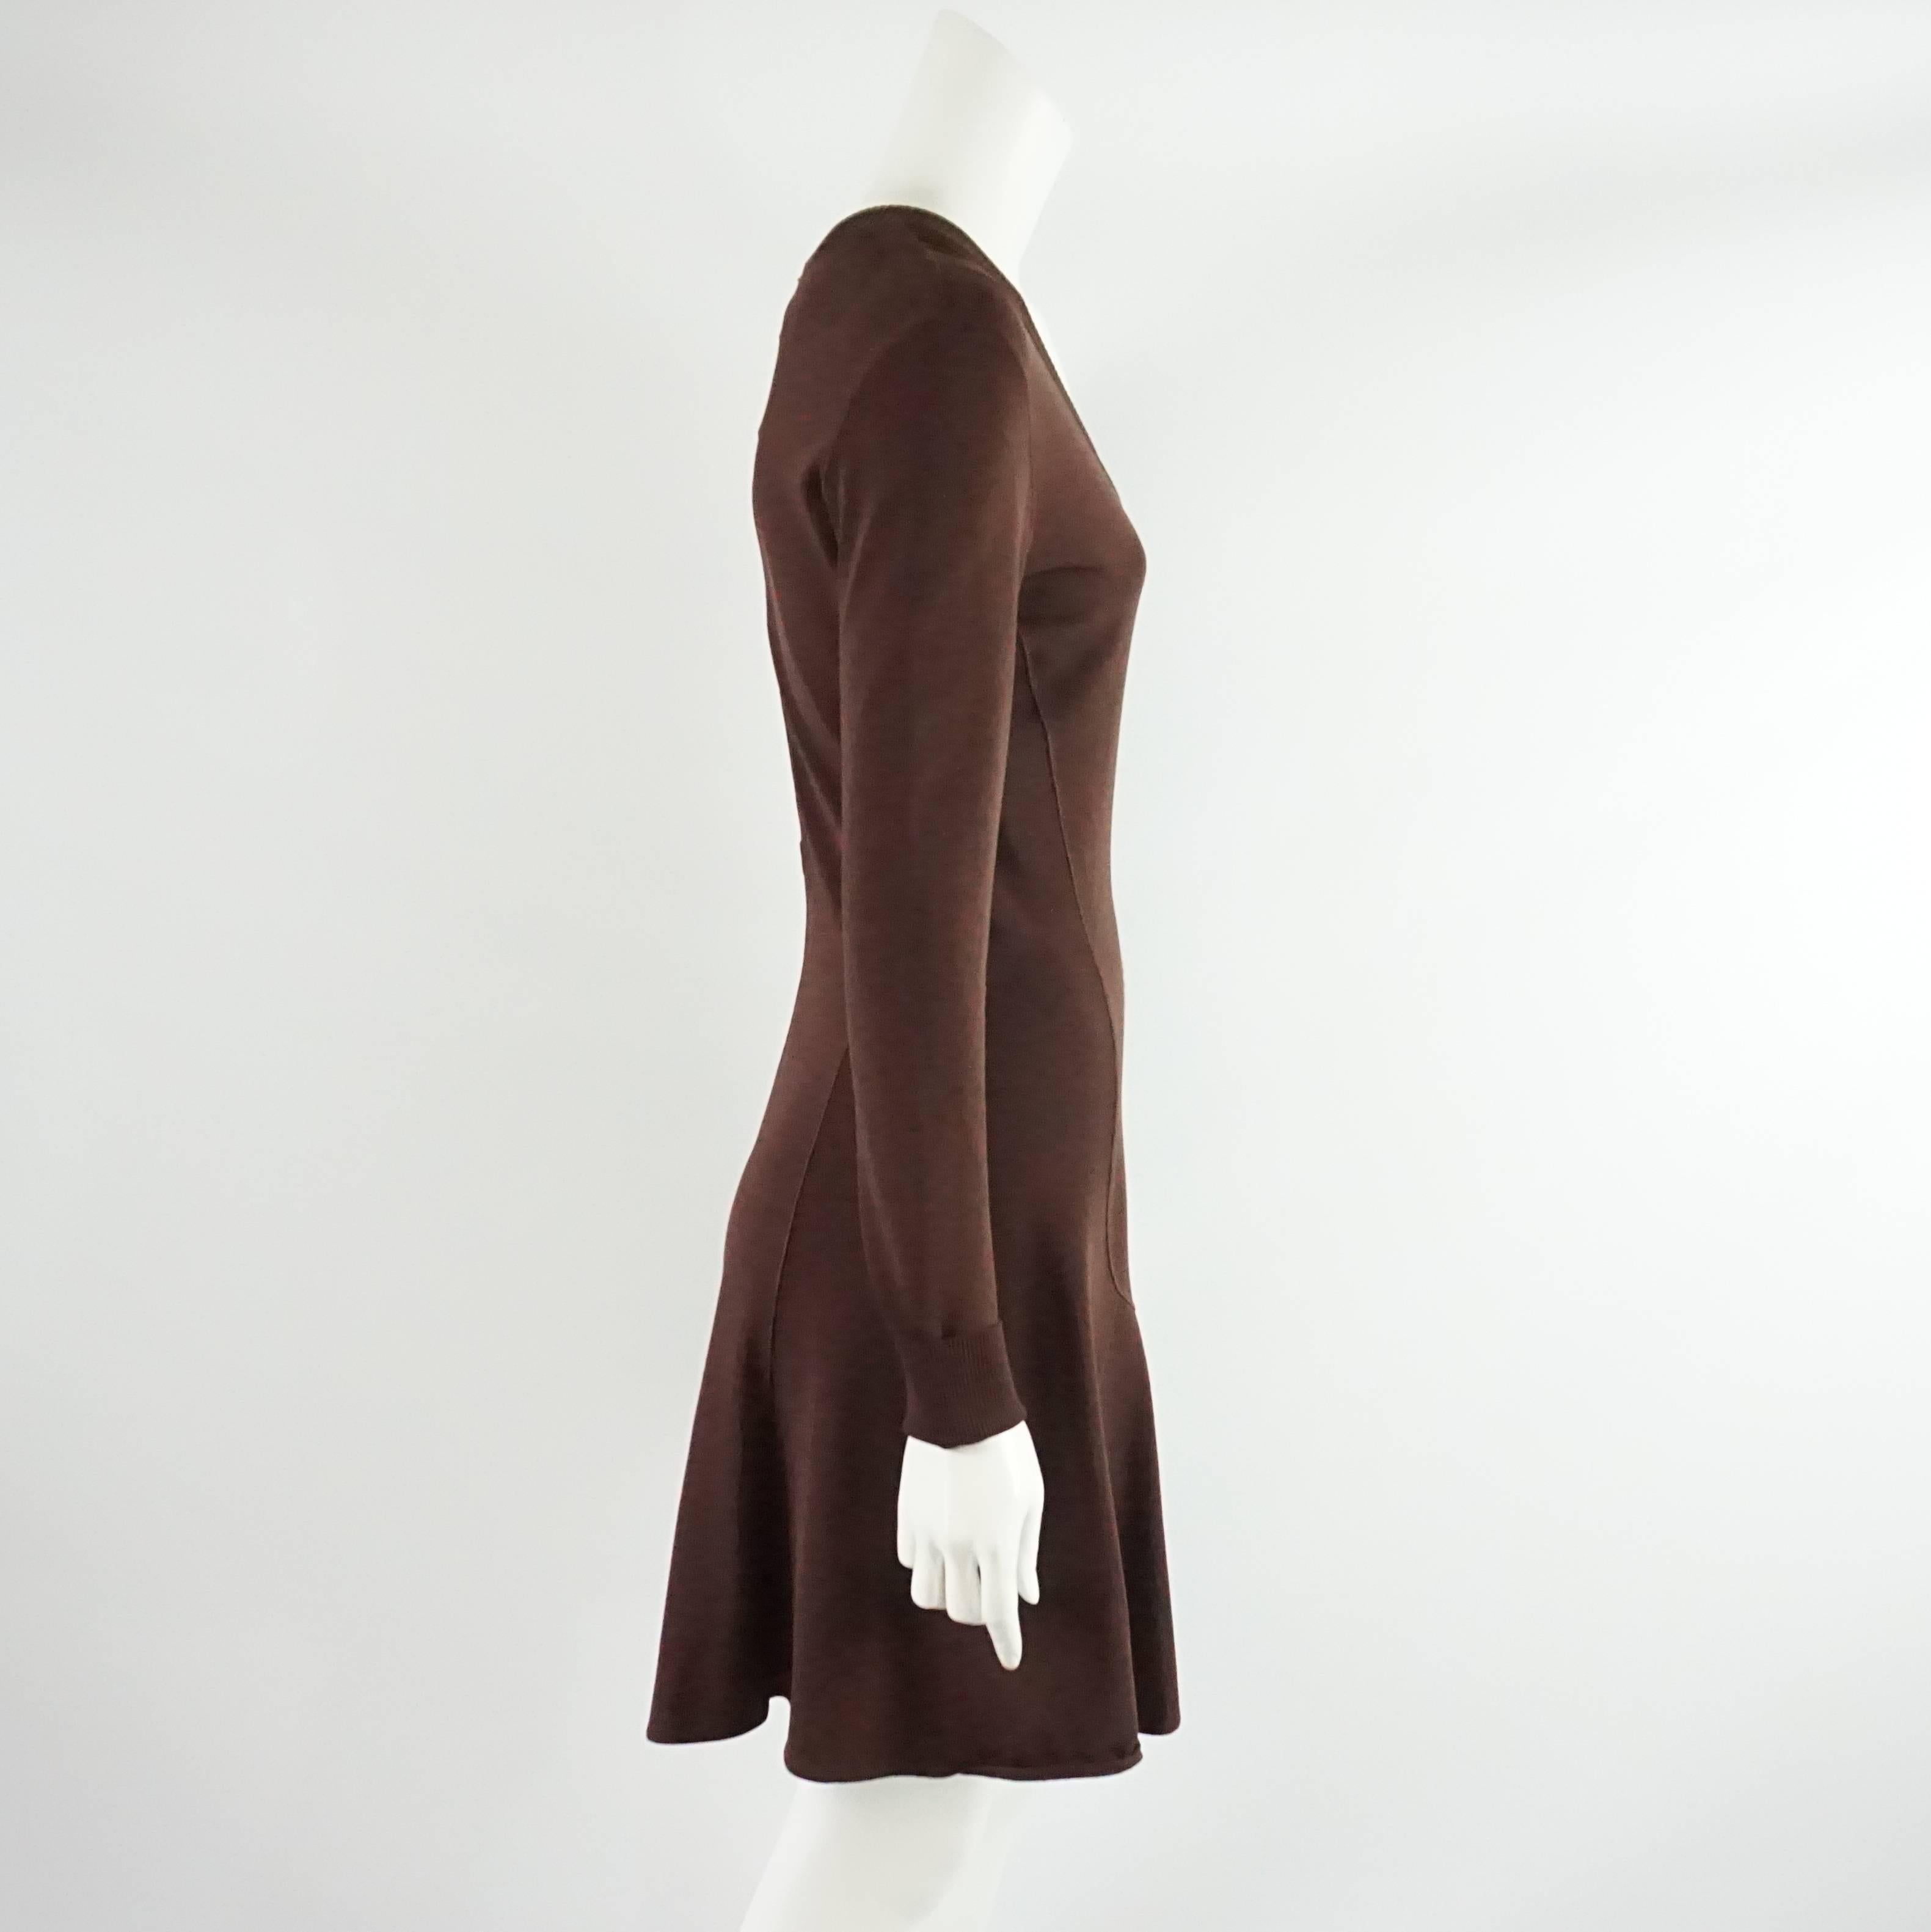 This Alaia brown knitted dress is made of a thick synthetic fabric. It has a tapered fit with a v-neck, flowing skirt, and back zipper. The piece is in good vintage condition with minor wear to the fabric and some pilling as seen in the images.